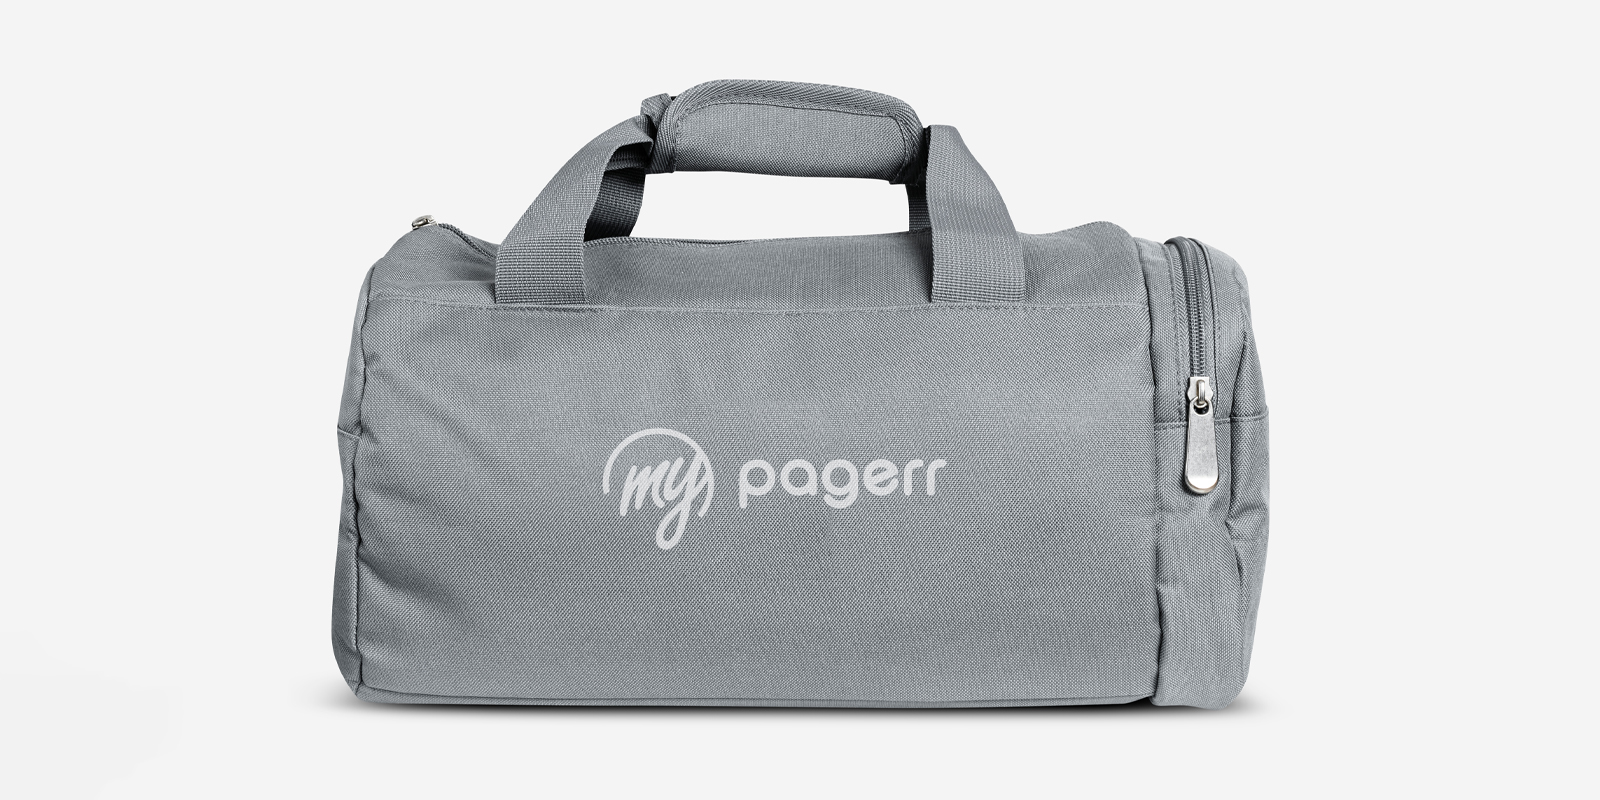 Duffel & gym bags in Seville - Print with Pagerr